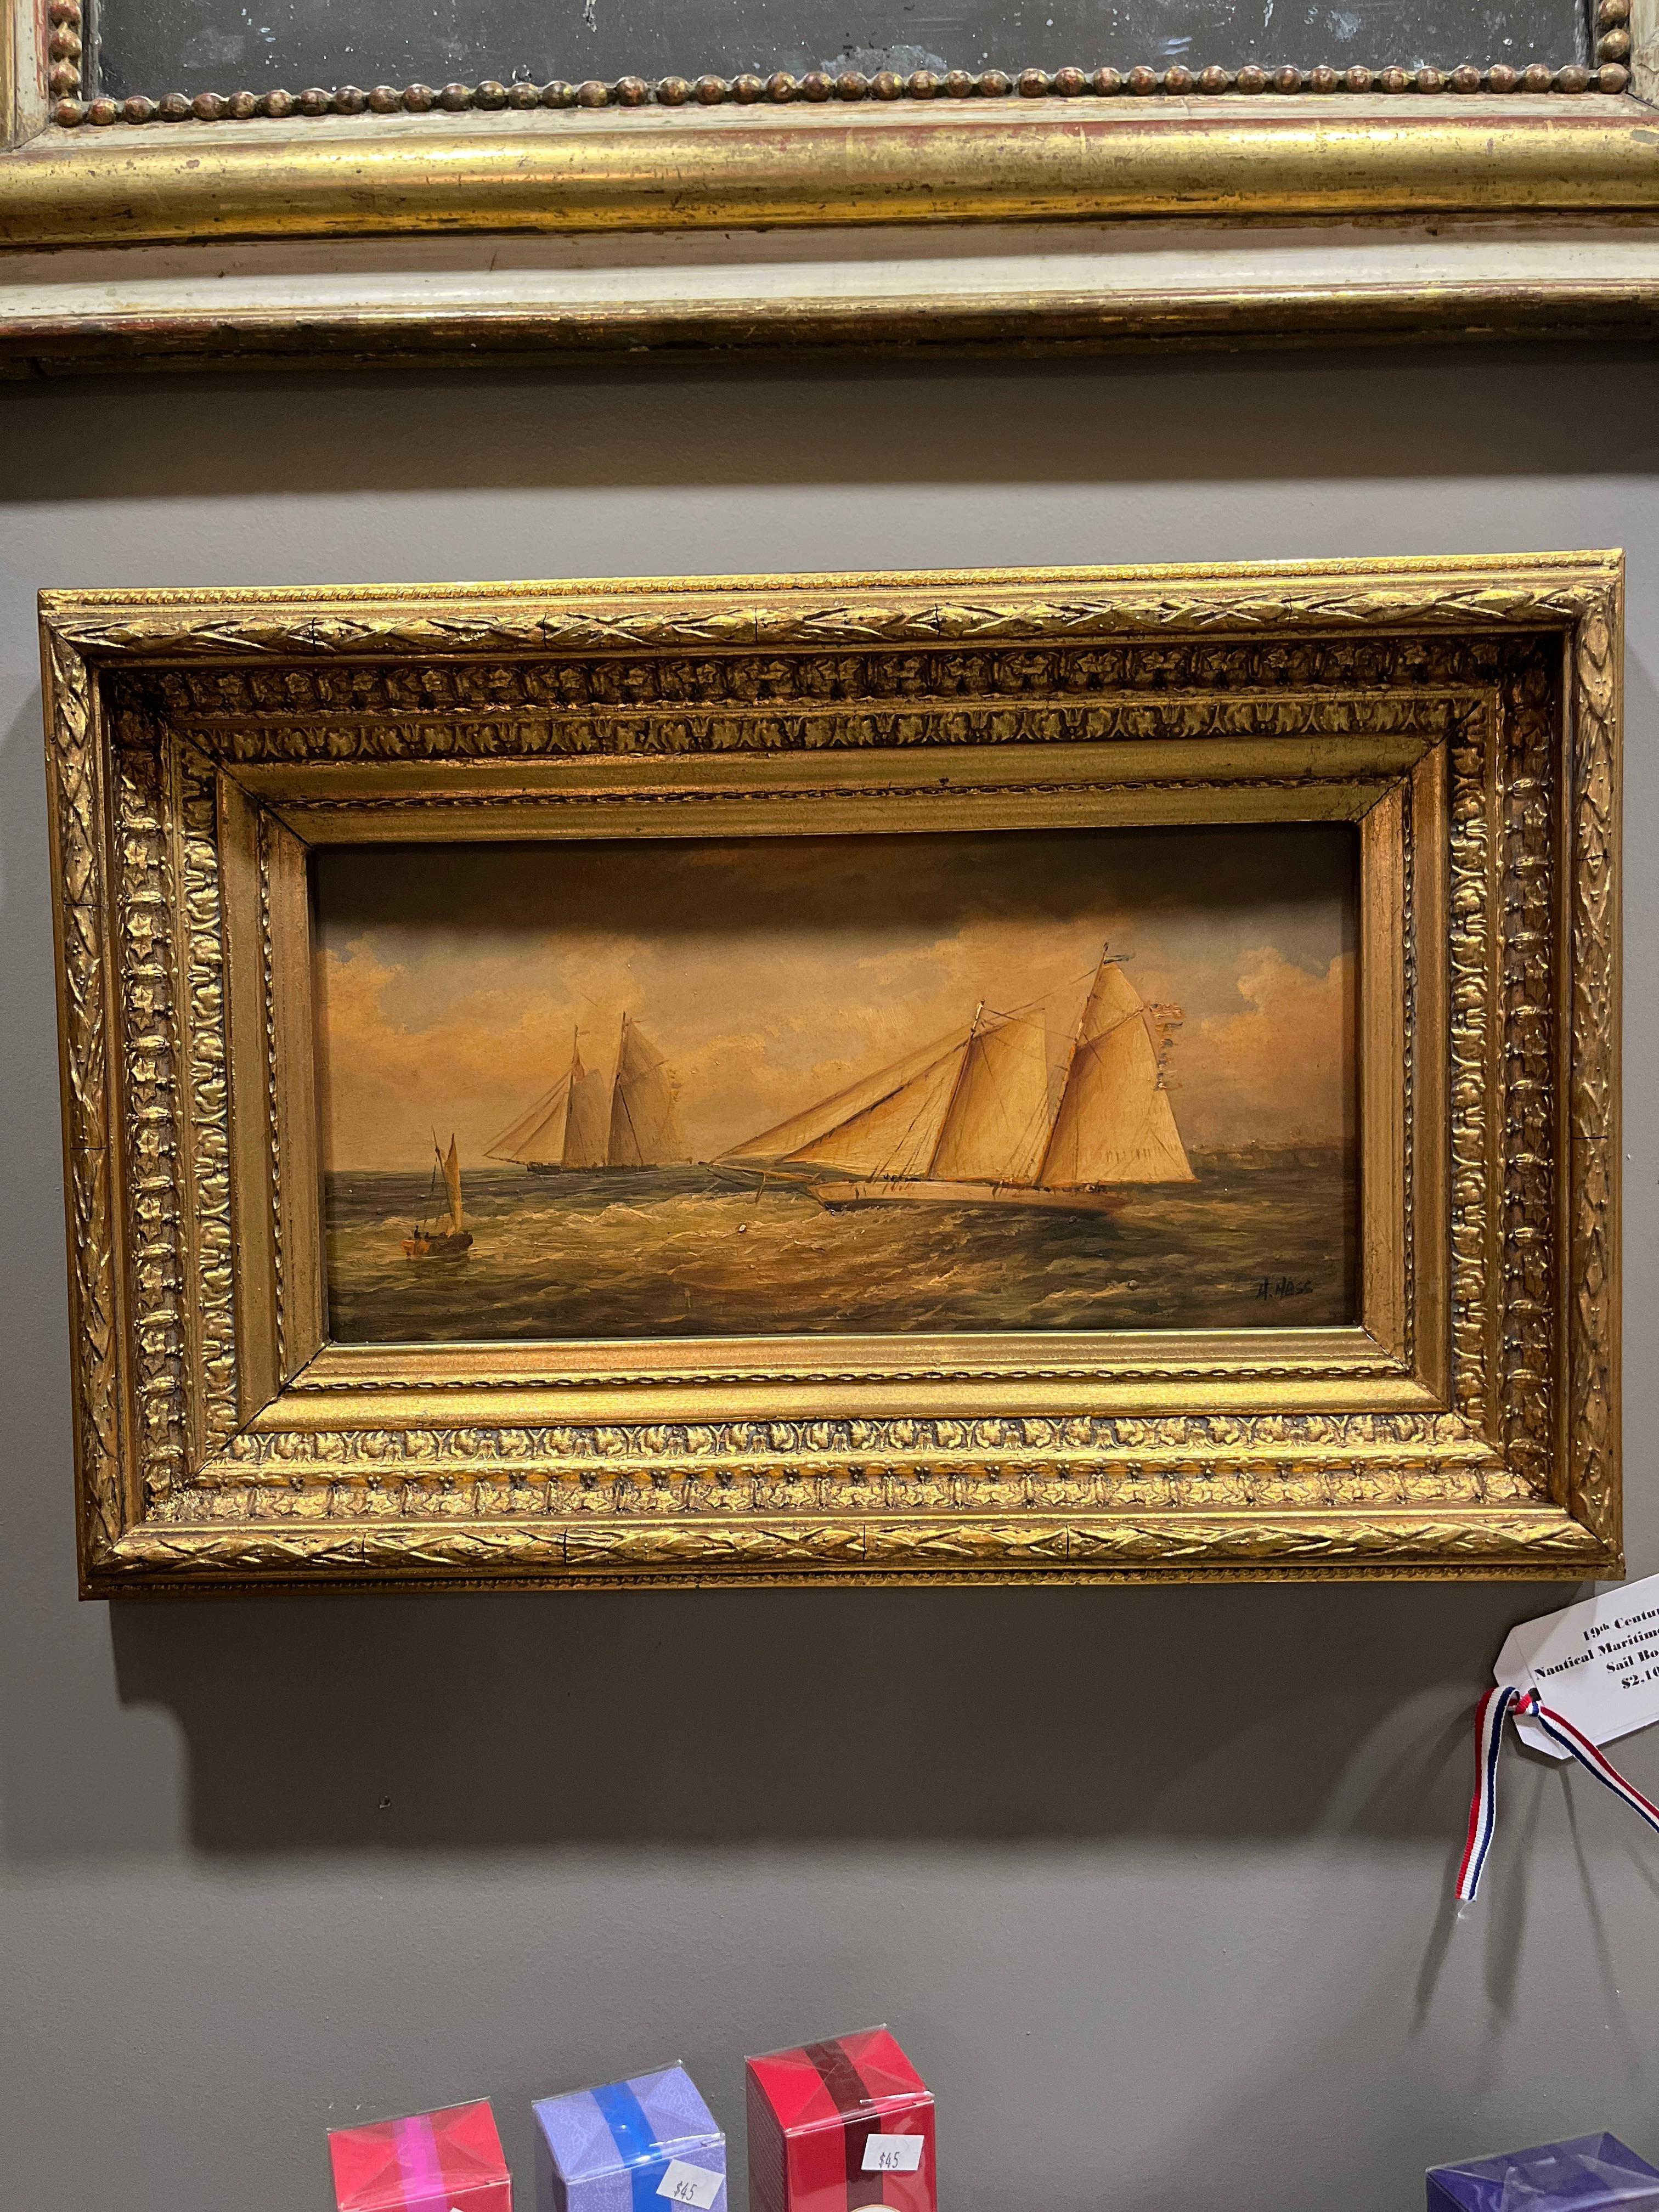 19th Century Nautical Maritime Seascape Sail Boat 
The Artist is Heinrich Hess who has signed the Painting
